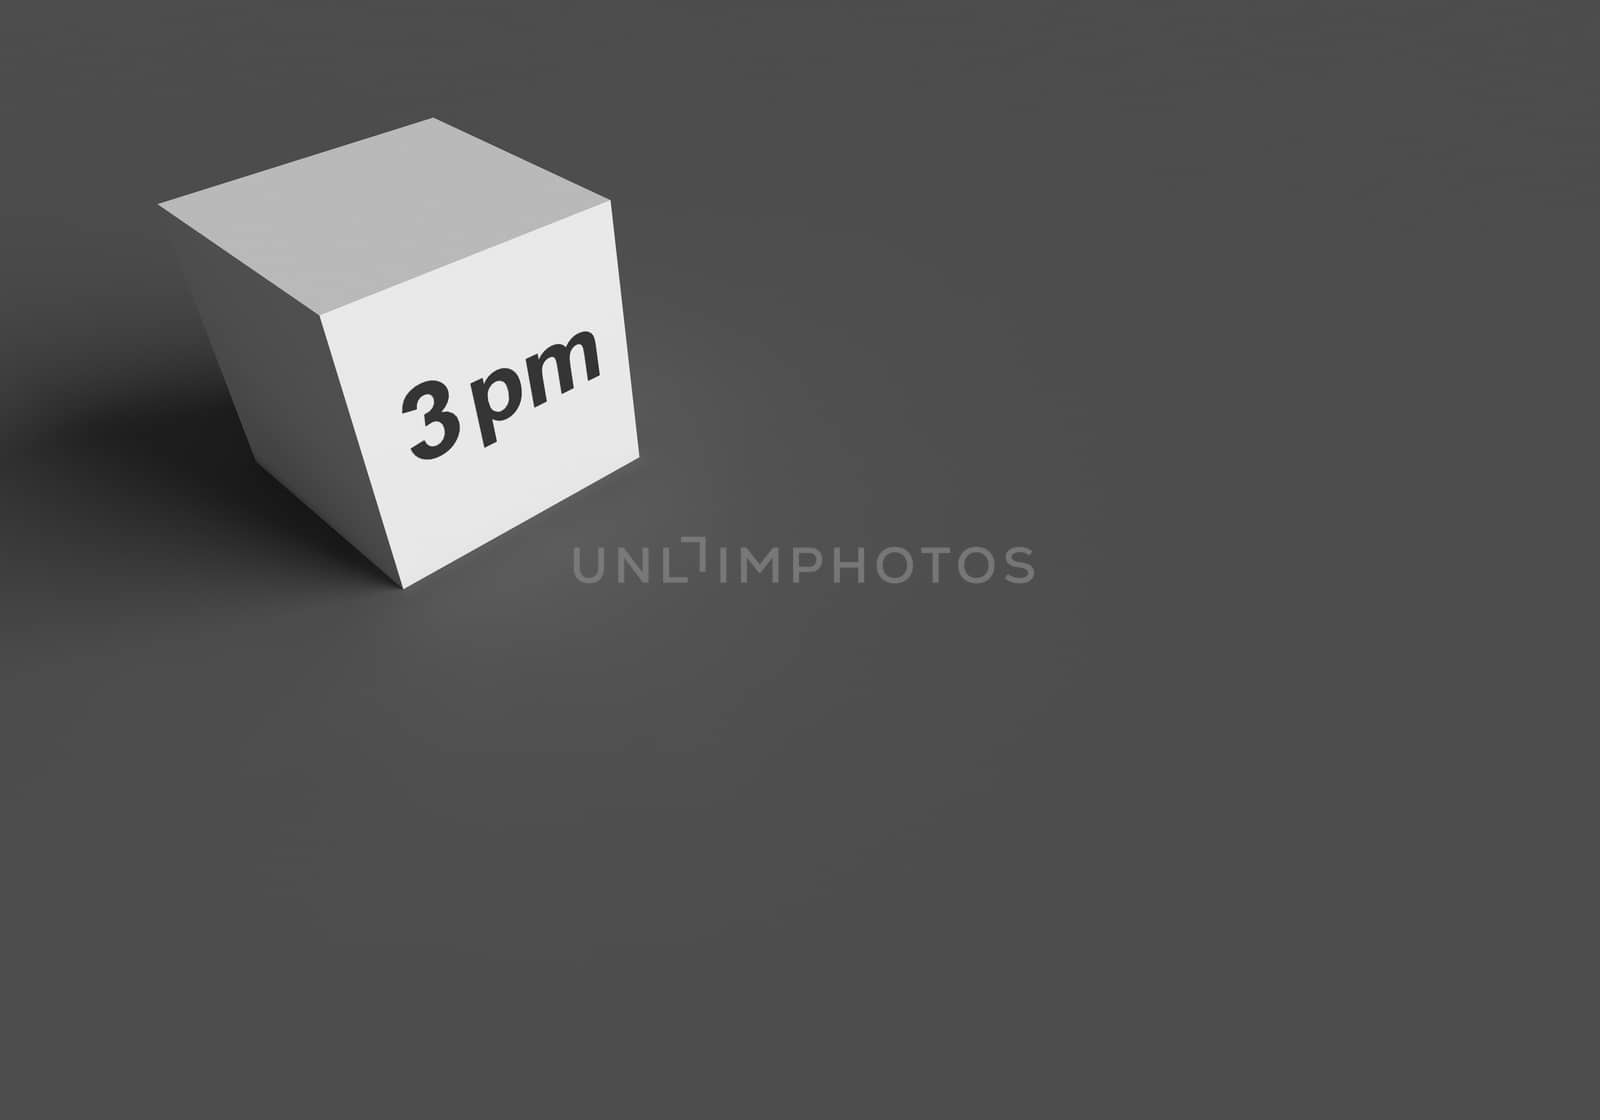 3D RENDERING WORDS 3 pm ON WHITE CUBE, STOCK PHOTO